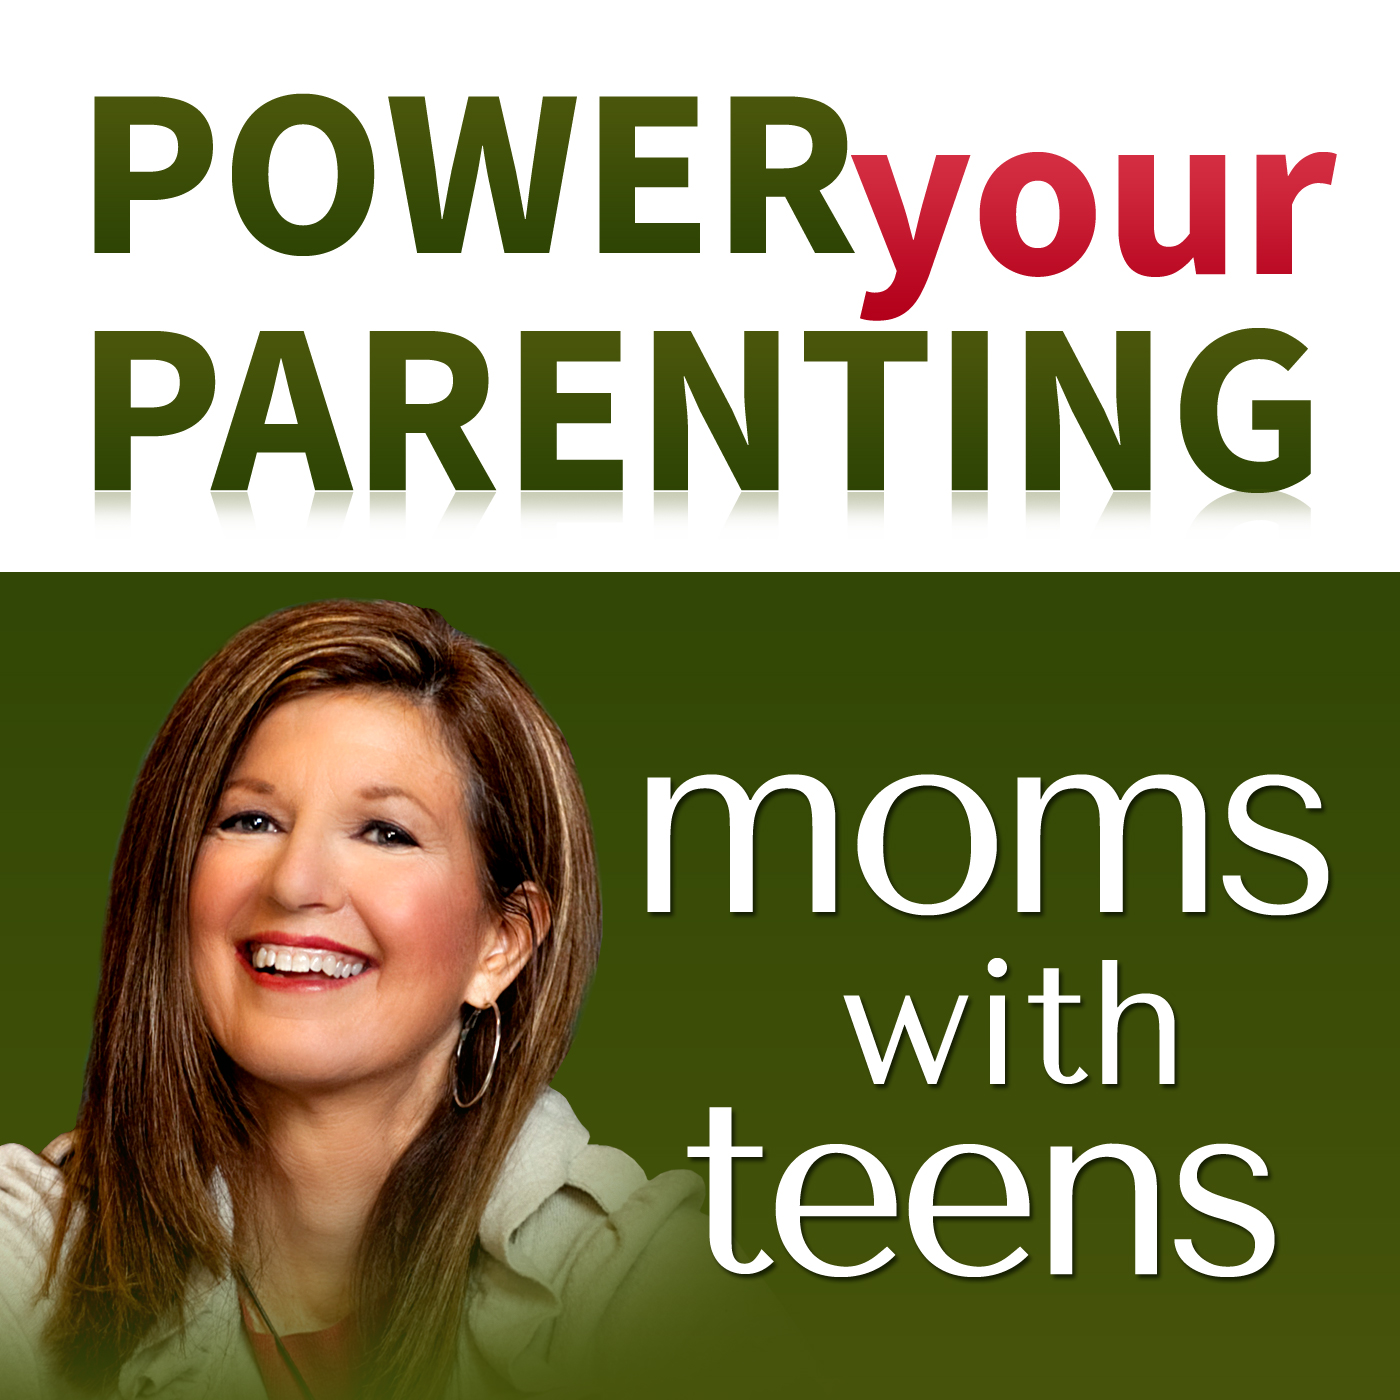 Power Your Parenting: Moms With Teens